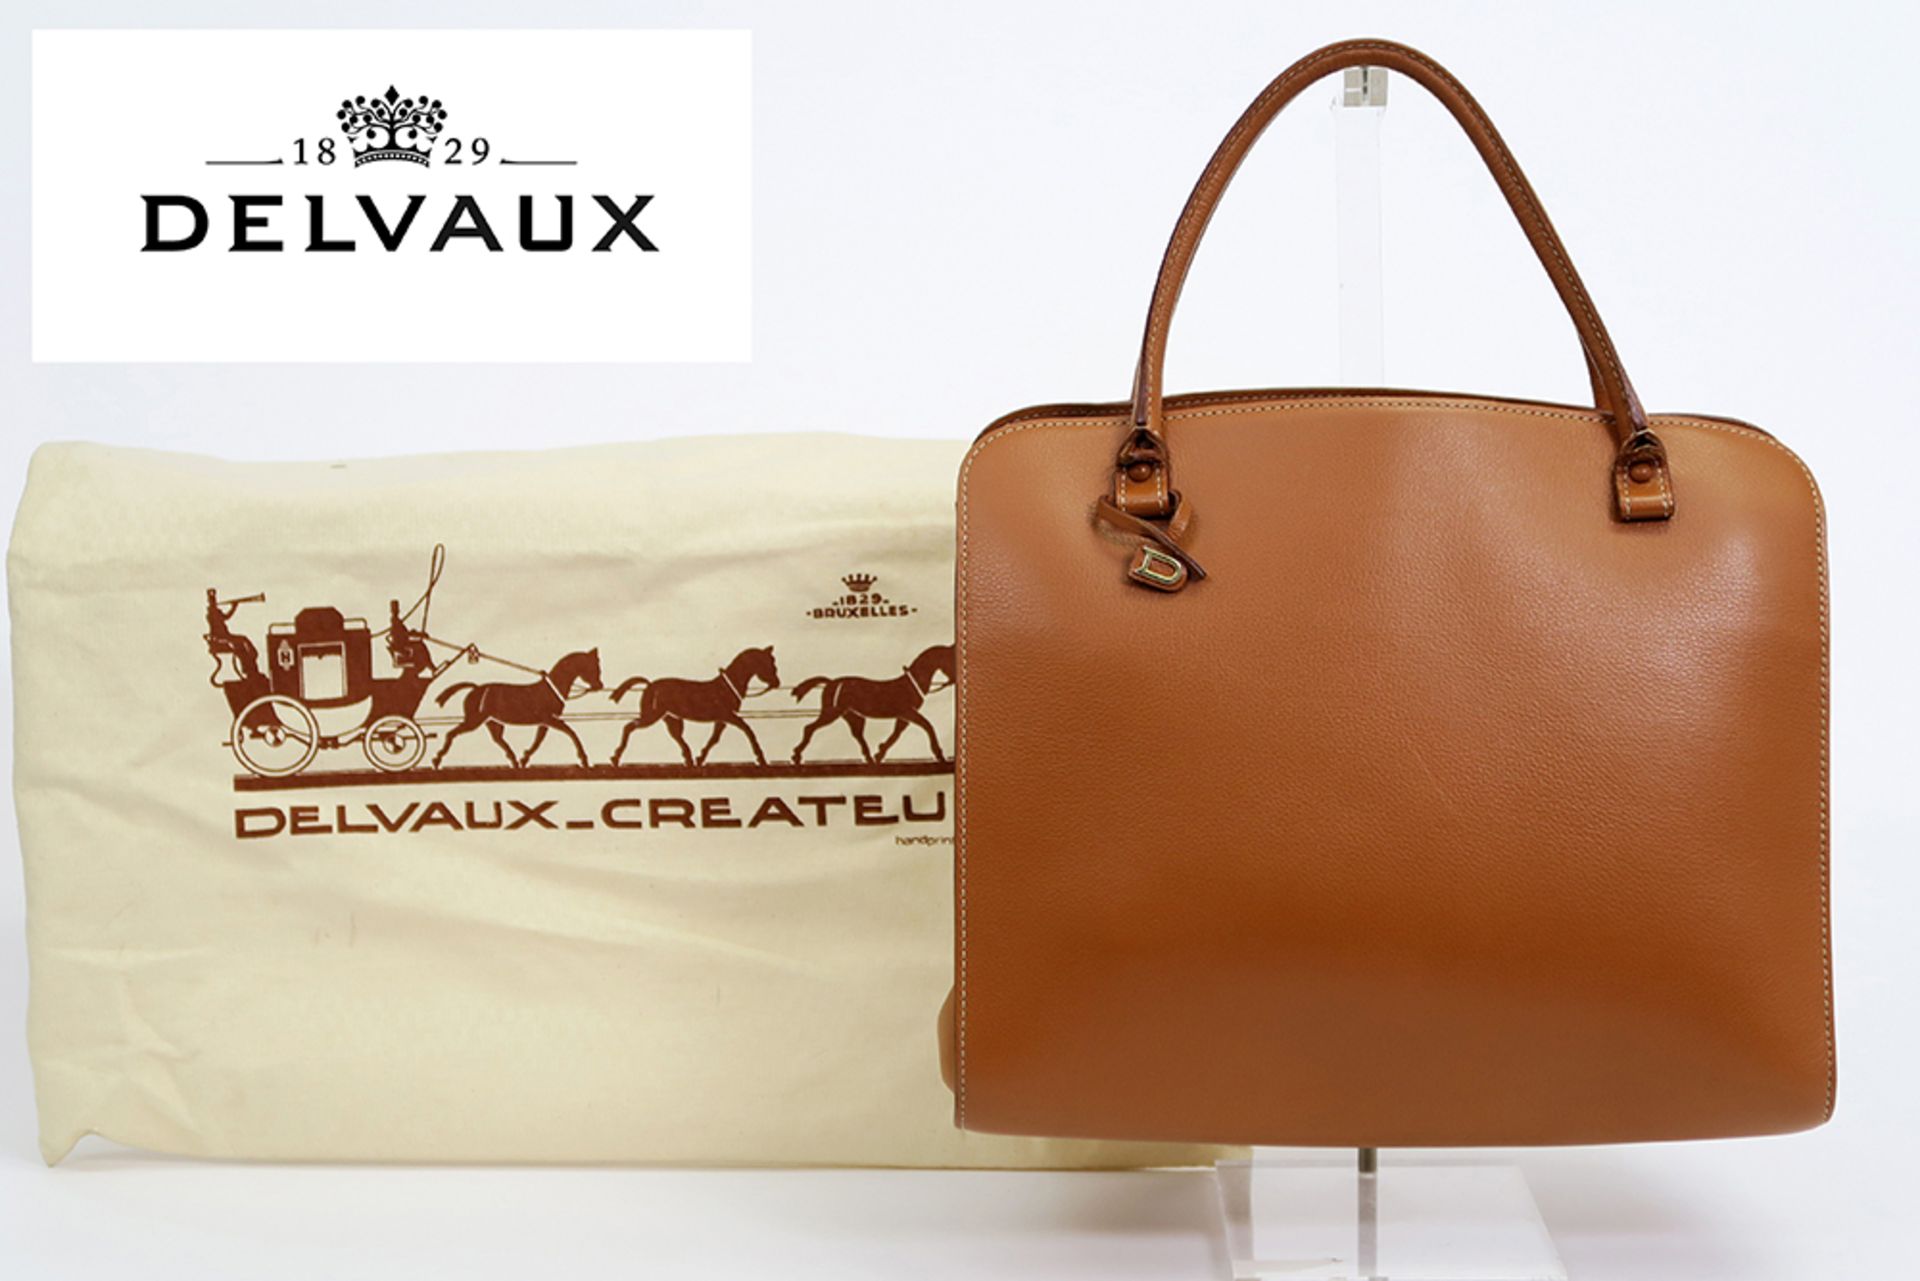 Delvaux marked "Sepia MM Jumping Fauve" handbag in leather - with certificate || DELVAUX handtas "